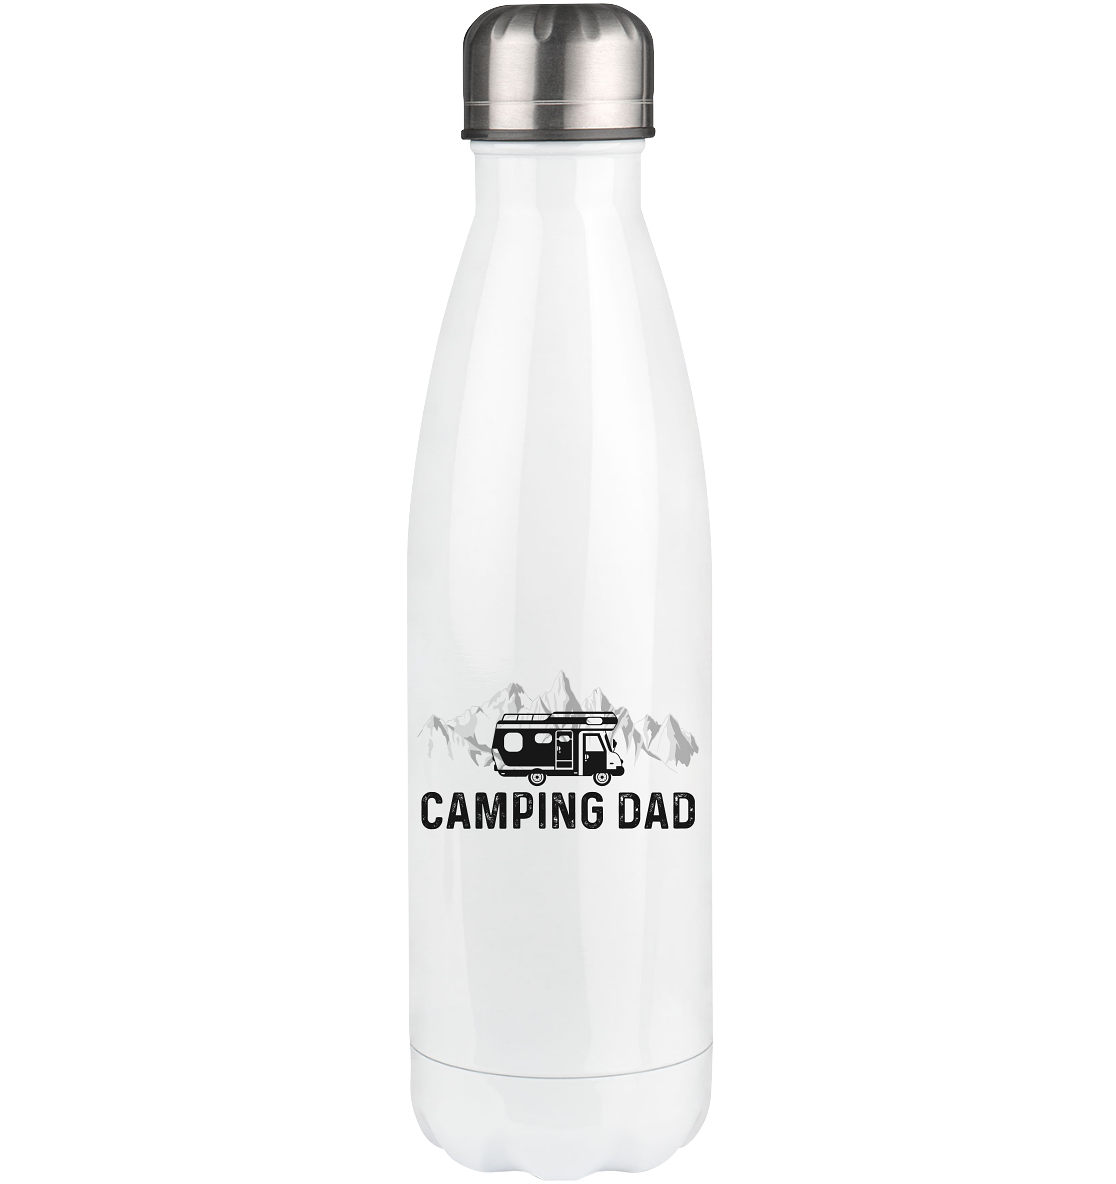 Camping Dad - Edelstahl Thermosflasche camping UONP 500ml